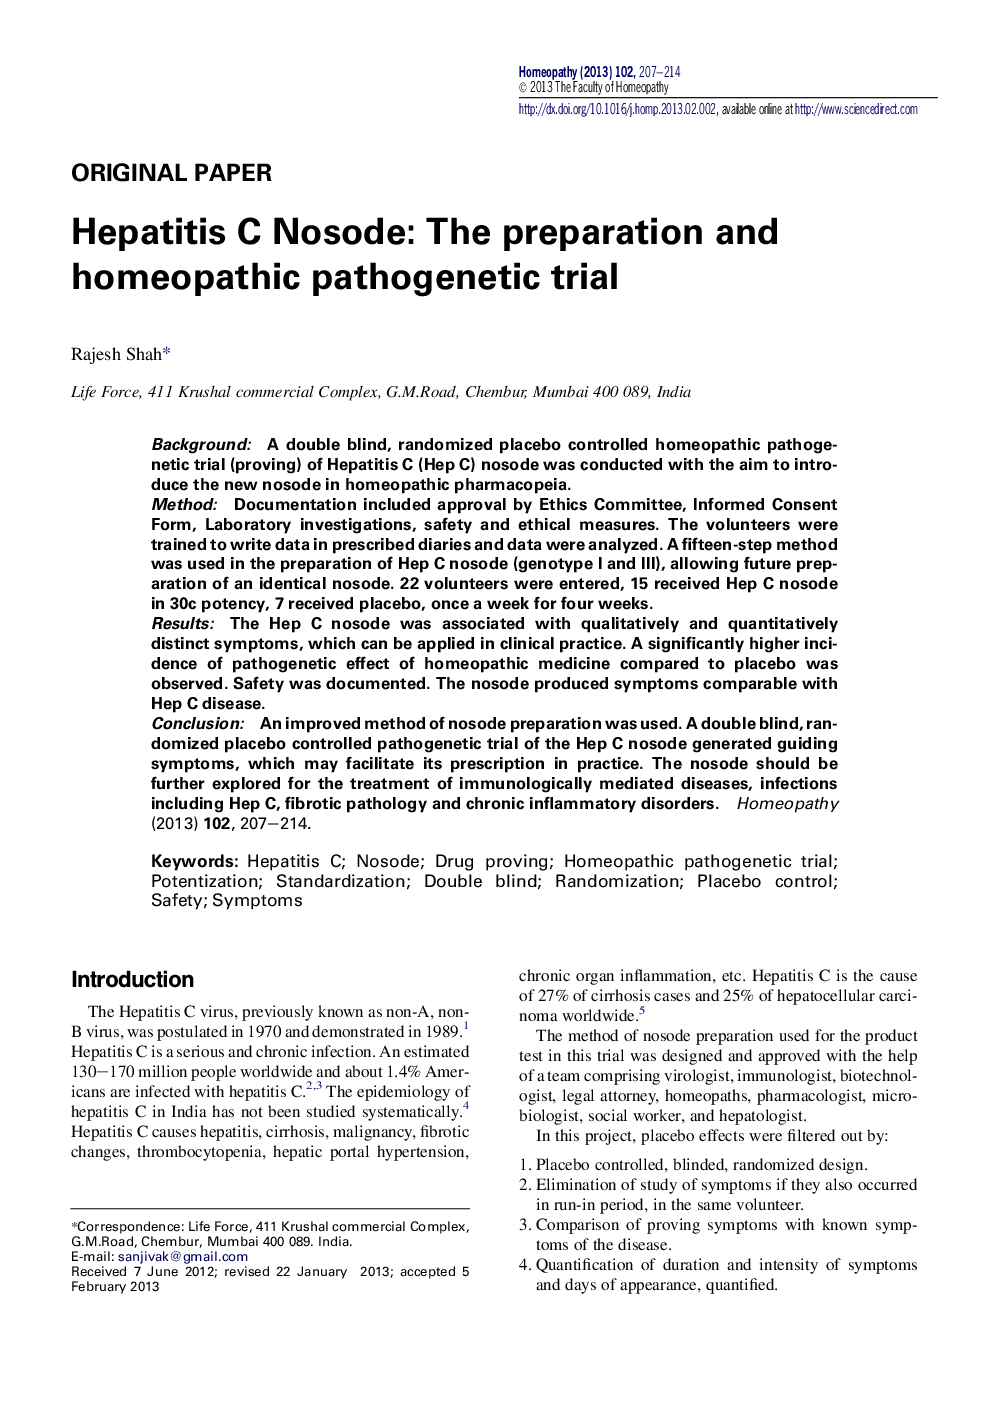 Hepatitis C Nosode: The preparation and homeopathic pathogenetic trial